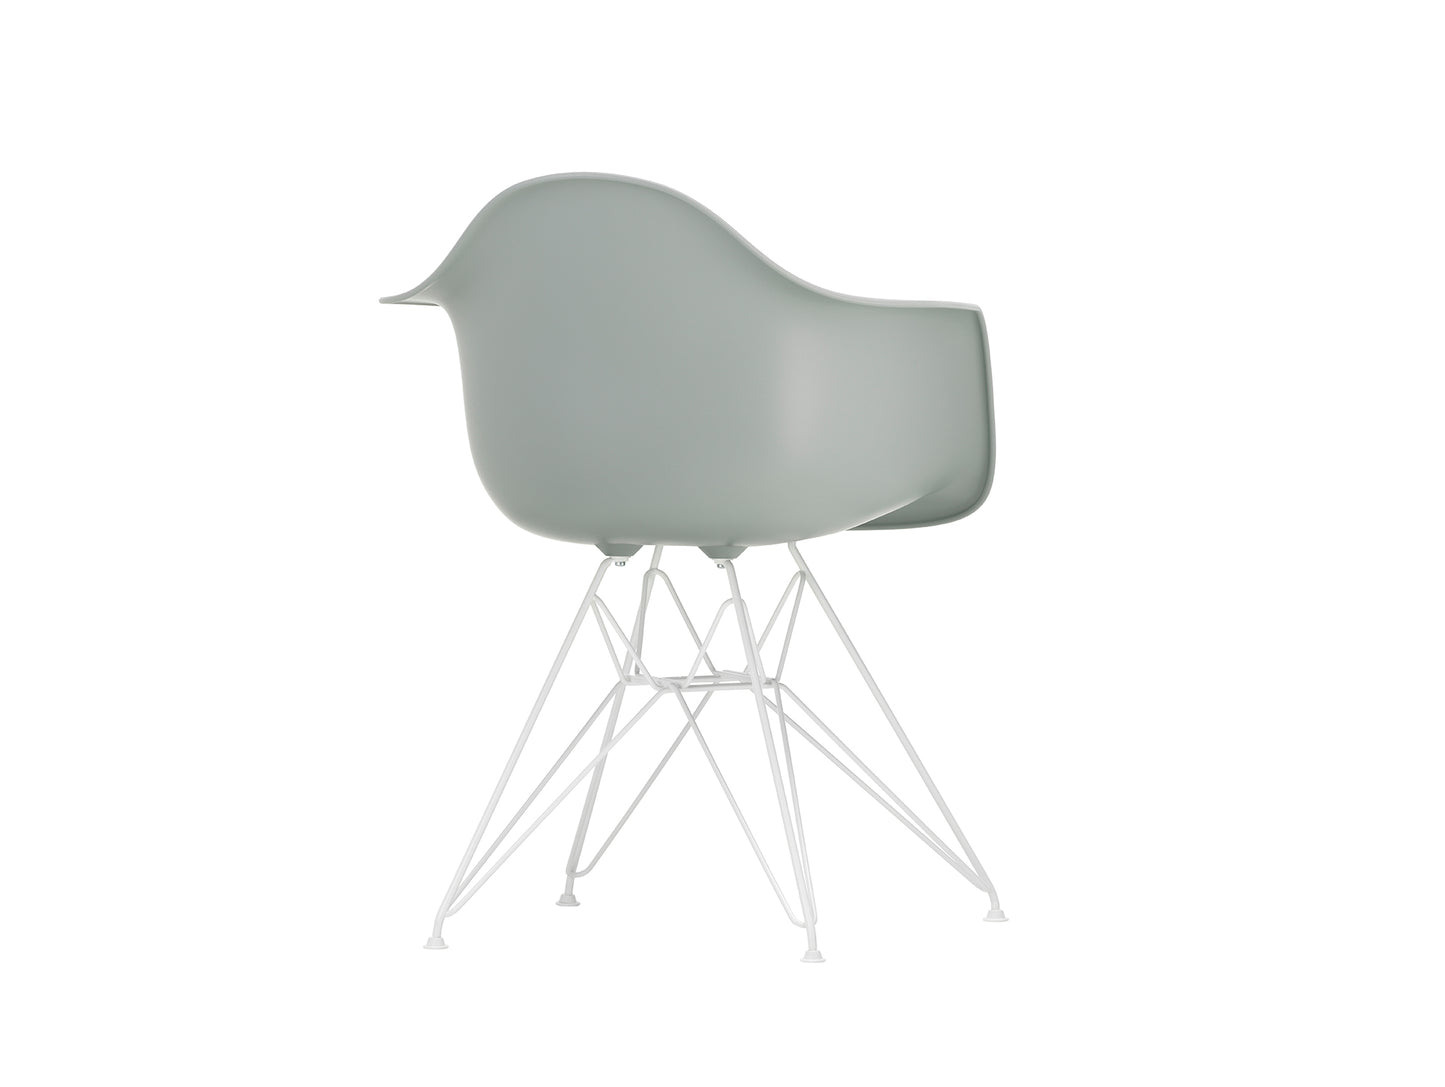 Eames DAR Plastic Armchair RE by Vitra - 24 Light Grey Shell / White Base